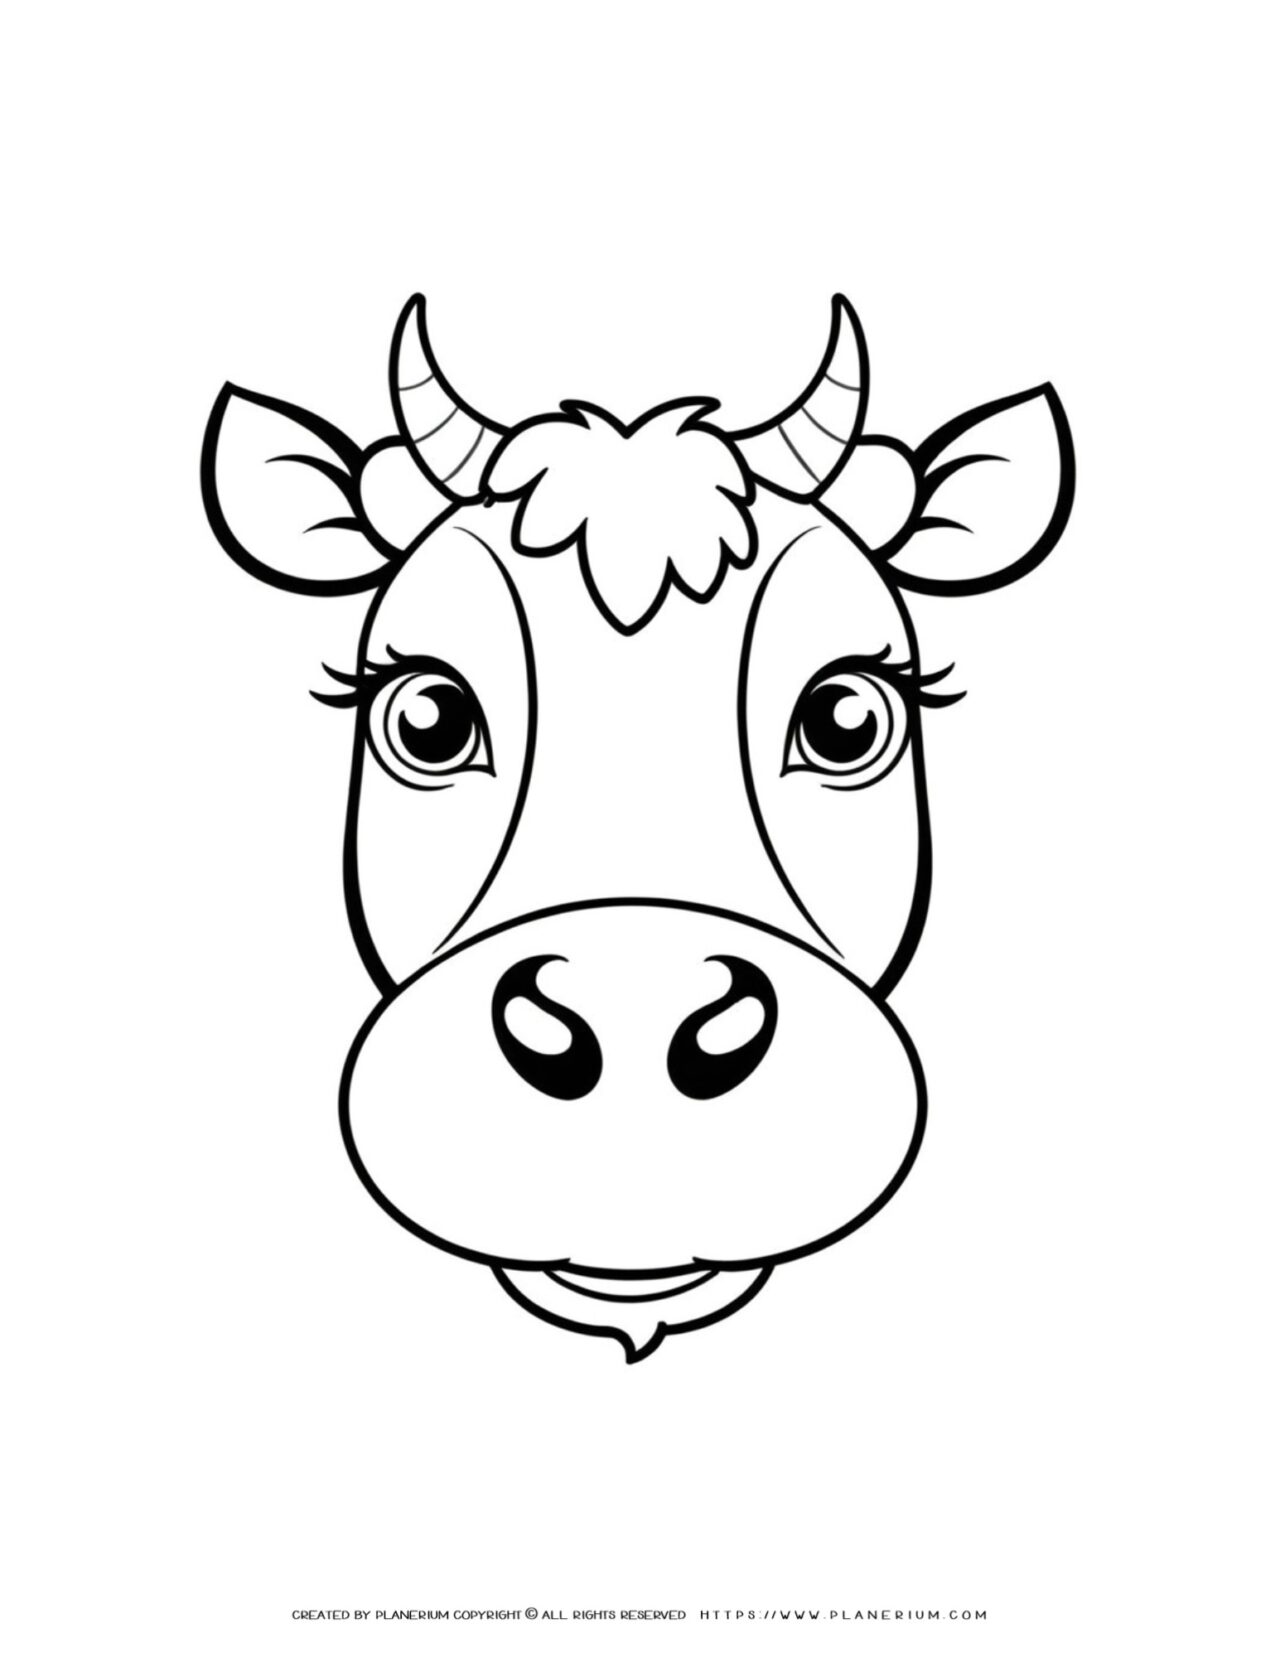 cow-face-artistic-style-outline-coloring-page